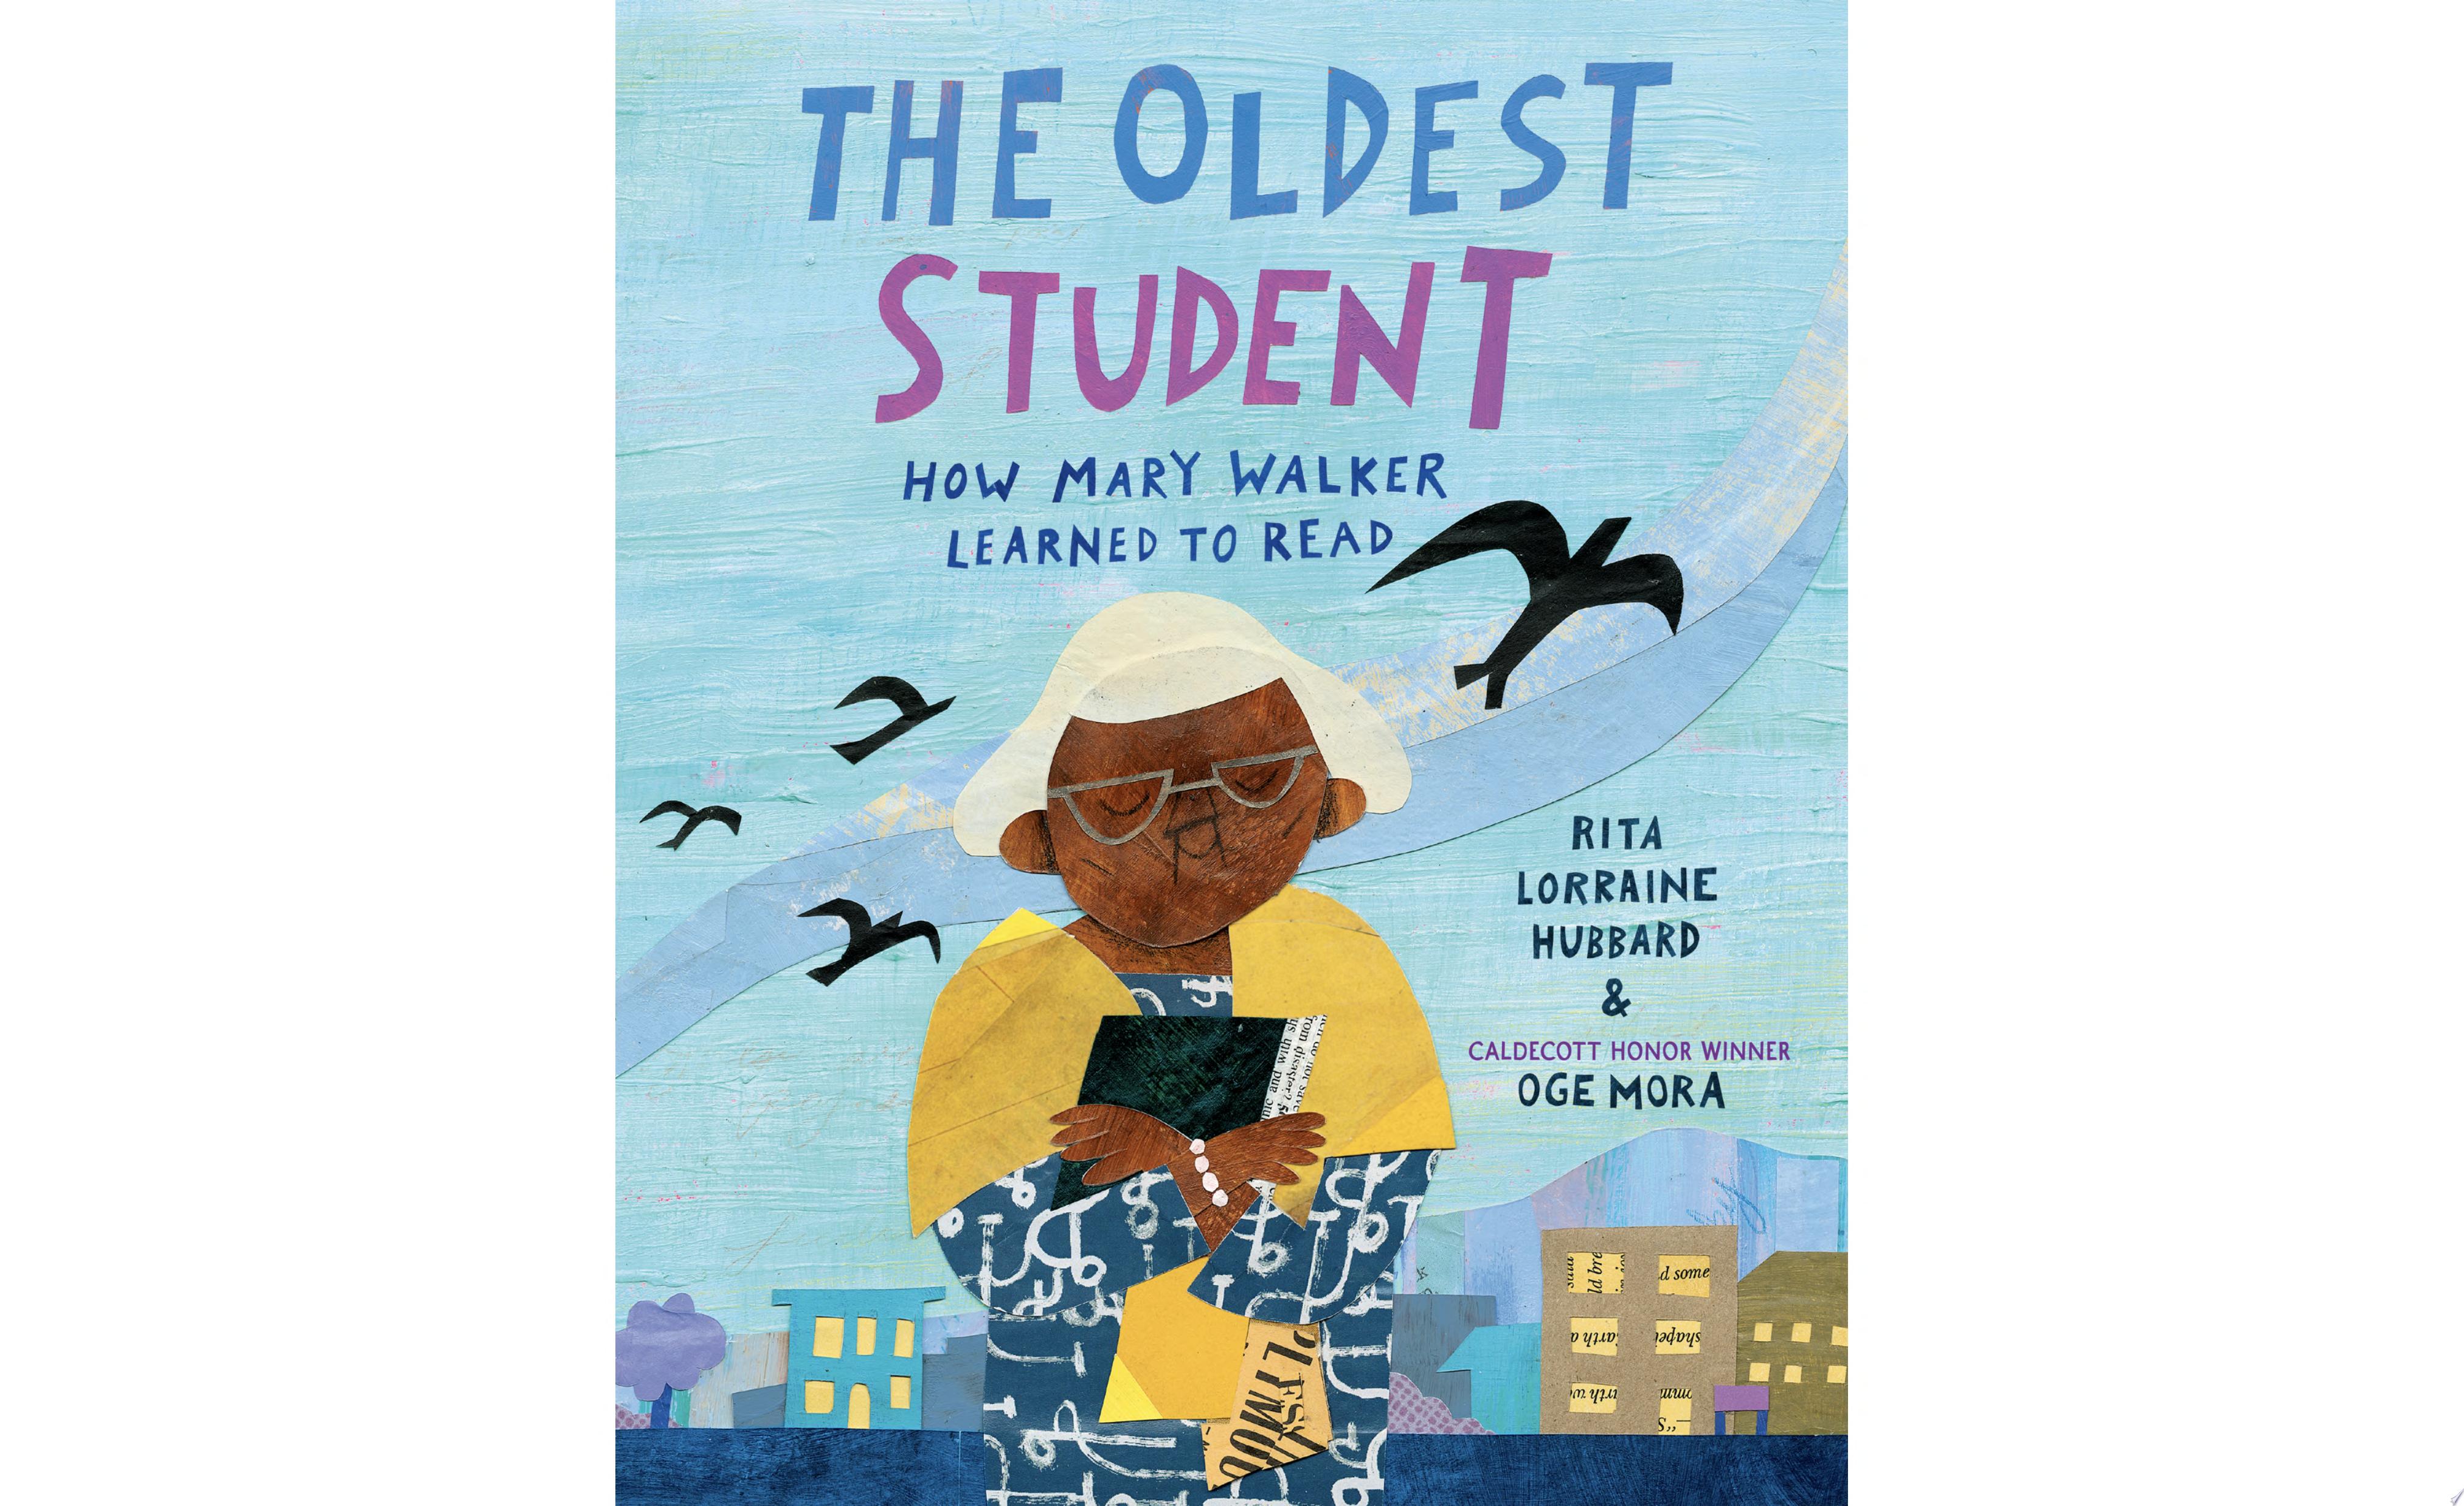 Image for "The Oldest Student: How Mary Walker Learned to Read"